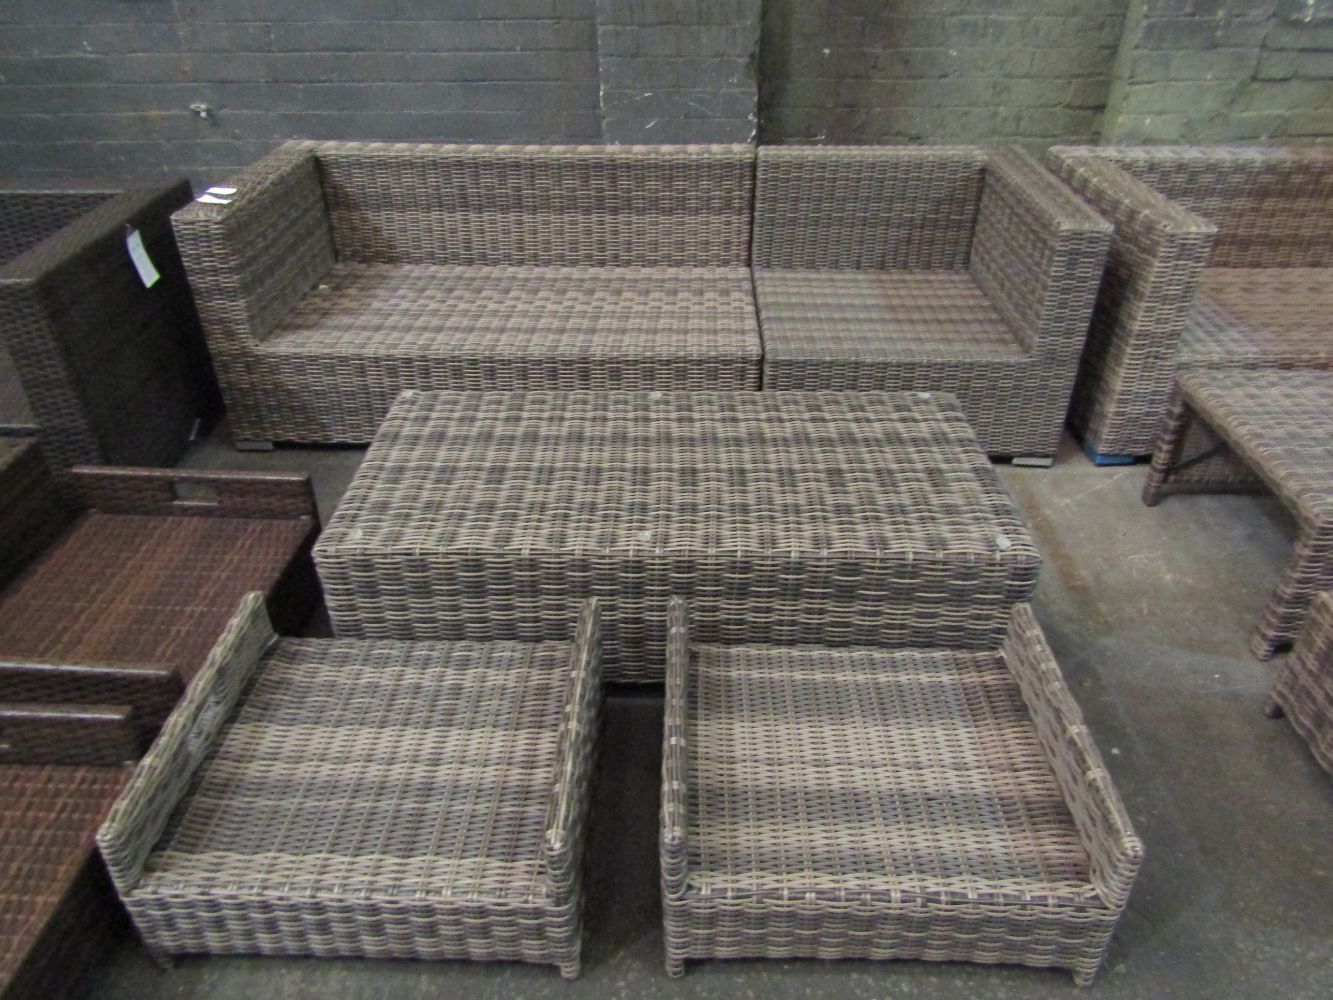 95% off Rattan Furniture from Rattan direct.